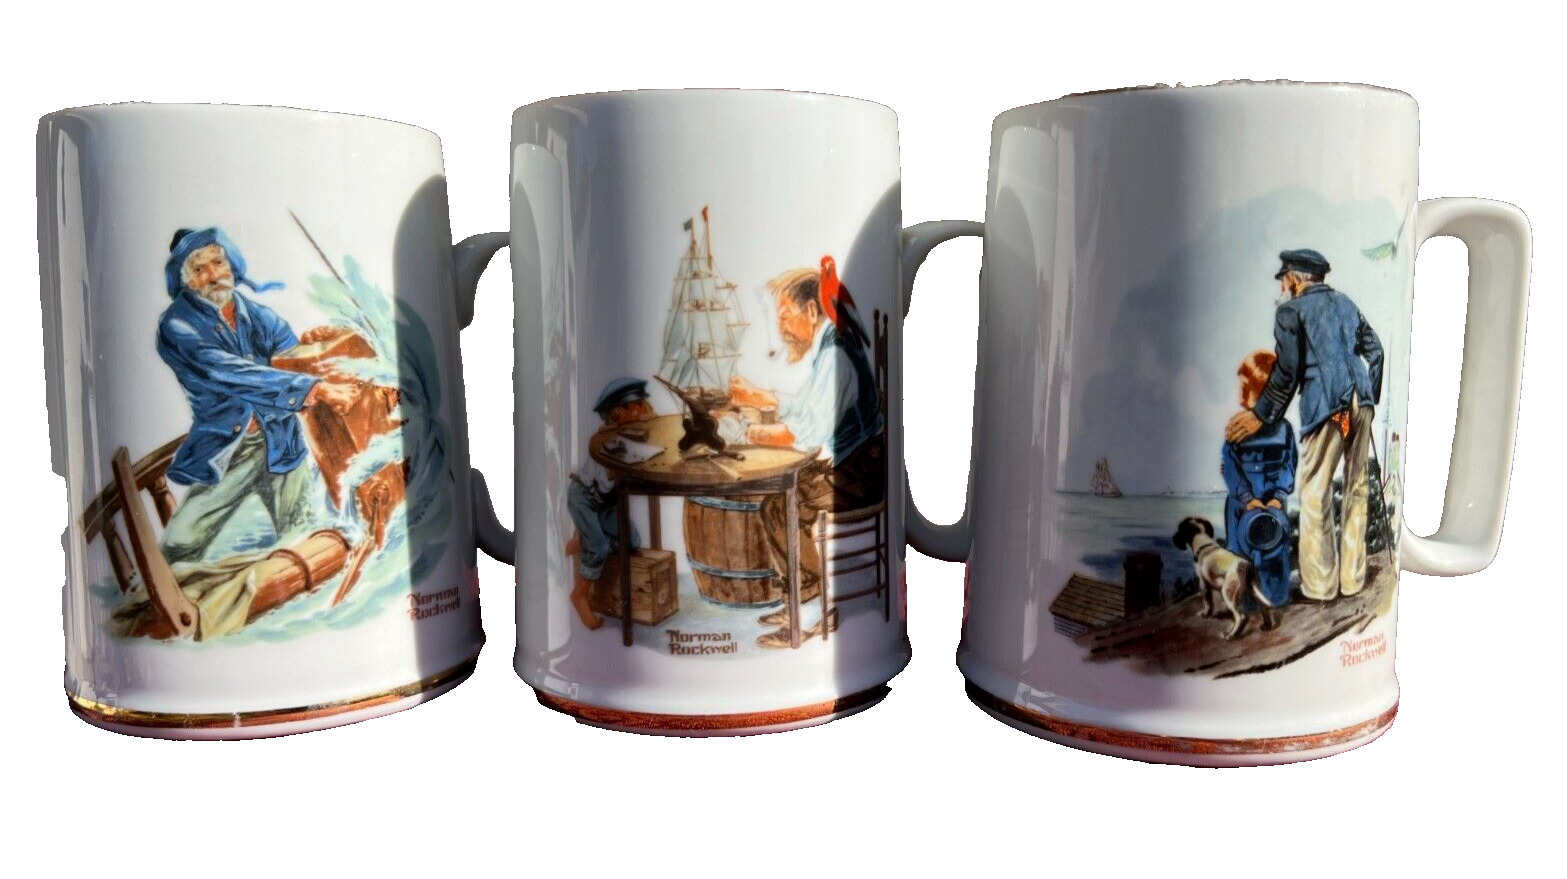 VTG 1985 Norman Rockwell Museum Coffee Mugs Authentic Seal Sailor 3 Tankards Set